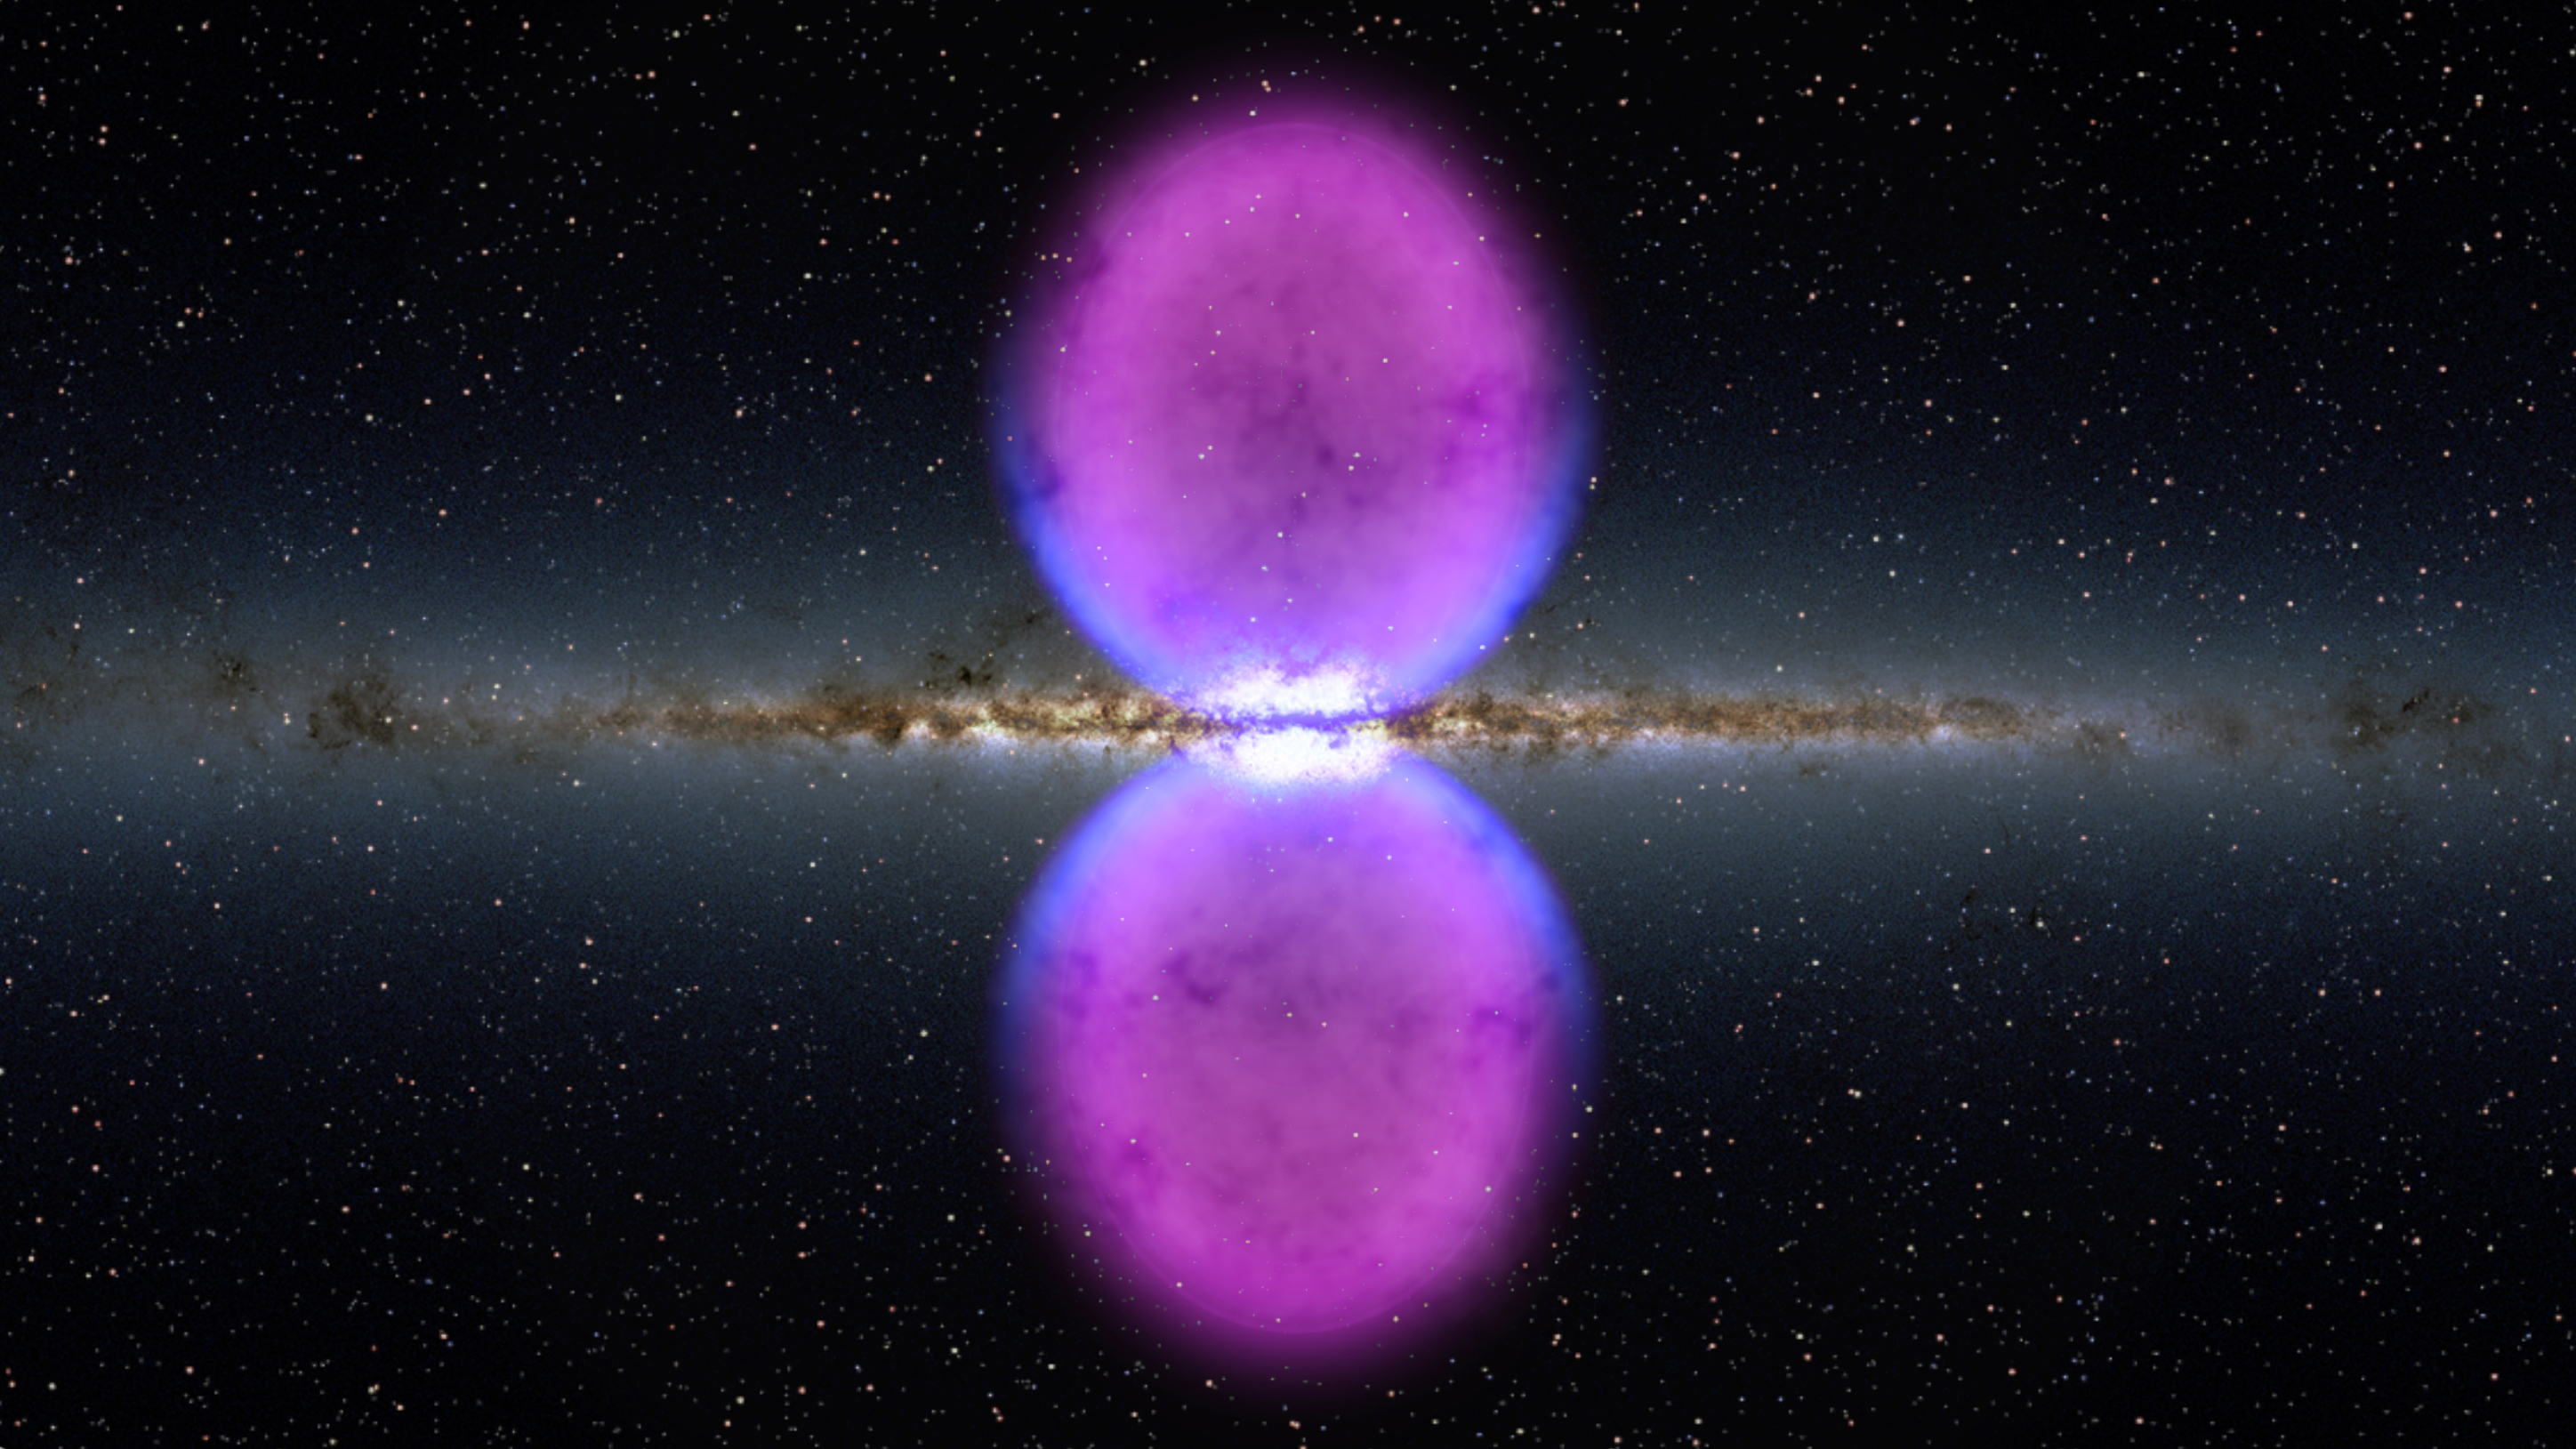 From end to end, the gamma-ray bubbles extend 50,000 light-years, or roughly half of the Milky Way's diameter, as shown in this illustration. The bubbles stretch across 100 degrees, spanning the sky from the constellation Virgo to the constellation Grus. If the structure were rotated into the galaxy's plane, it would extend beyond our solar system. Hints of the bubbles' edges were first observed in X-rays (blue) by ROSAT (Röntgen Satellite), a Germany-led mission operating in the 1990s. The gamma rays mapped by Fermi (magenta) extend much farther from the galaxy's plane. No Labels.